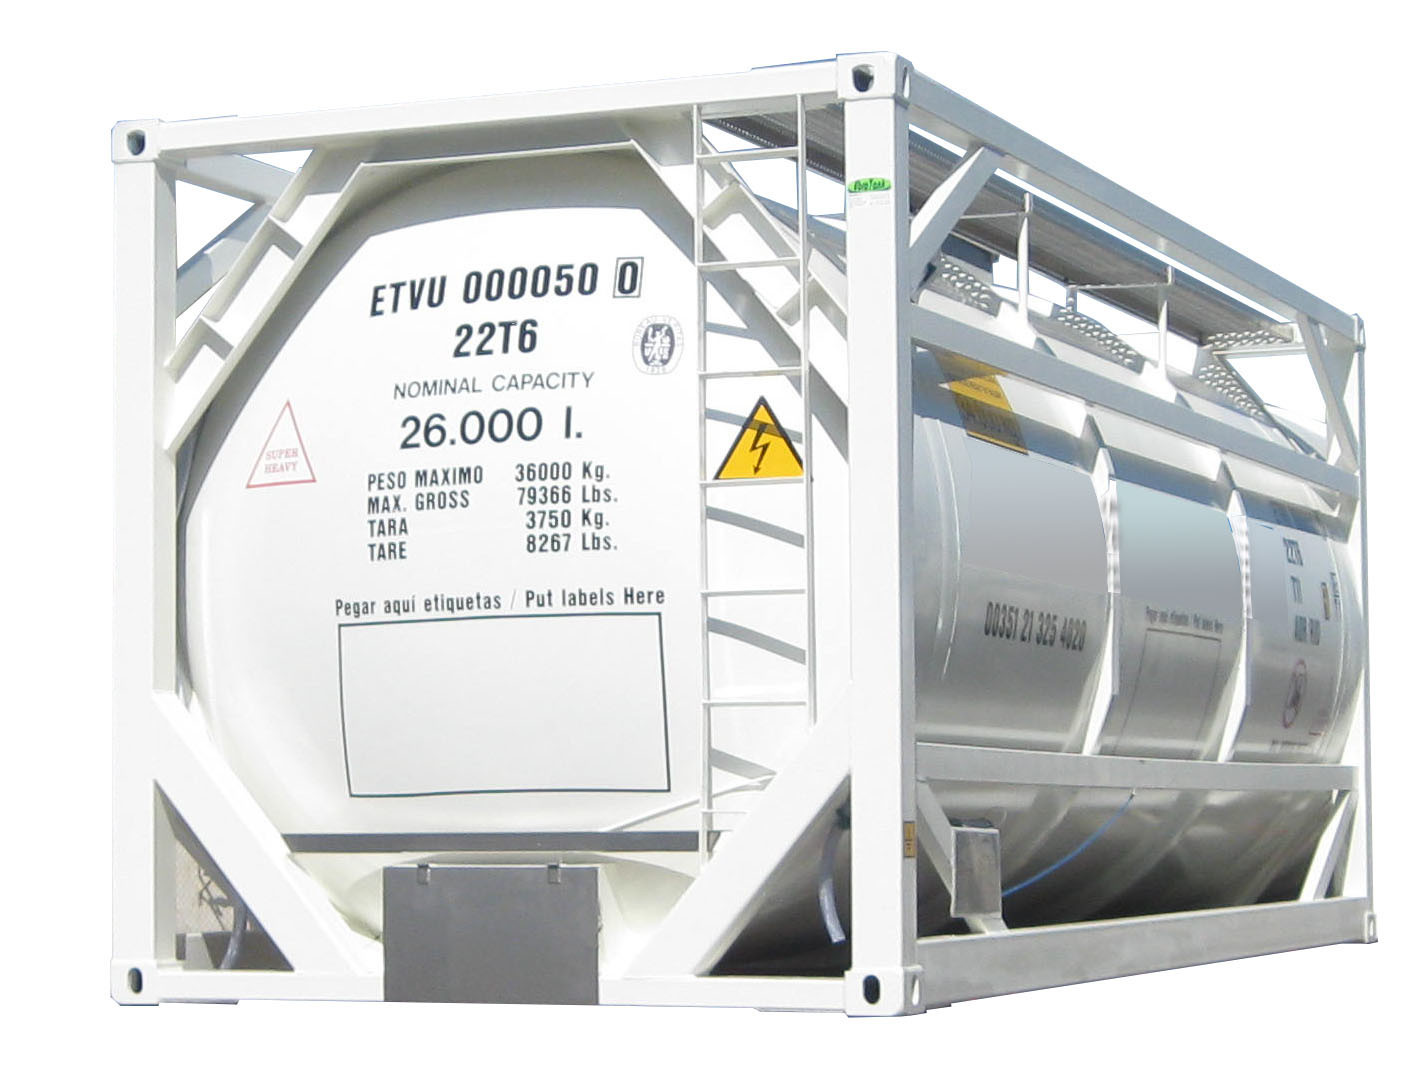                  ISO Tank Container Design, Standard ISO Tank Container Specifications, ISO Tanks Containers Food Liquids Chemicals Powders             